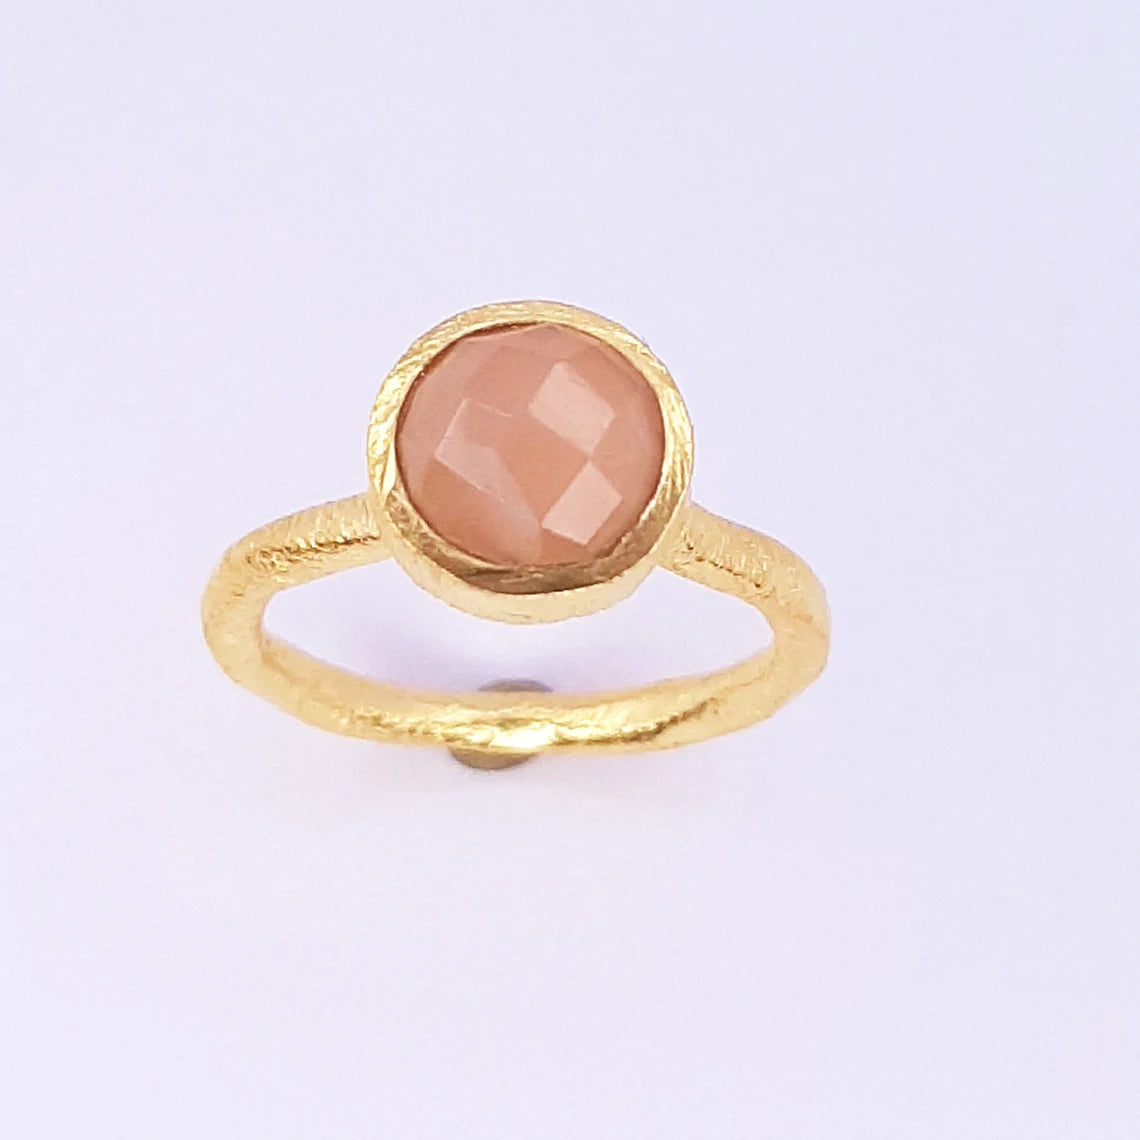 Peach Color Gemstone Ring- moonstone ring, Gold Ring